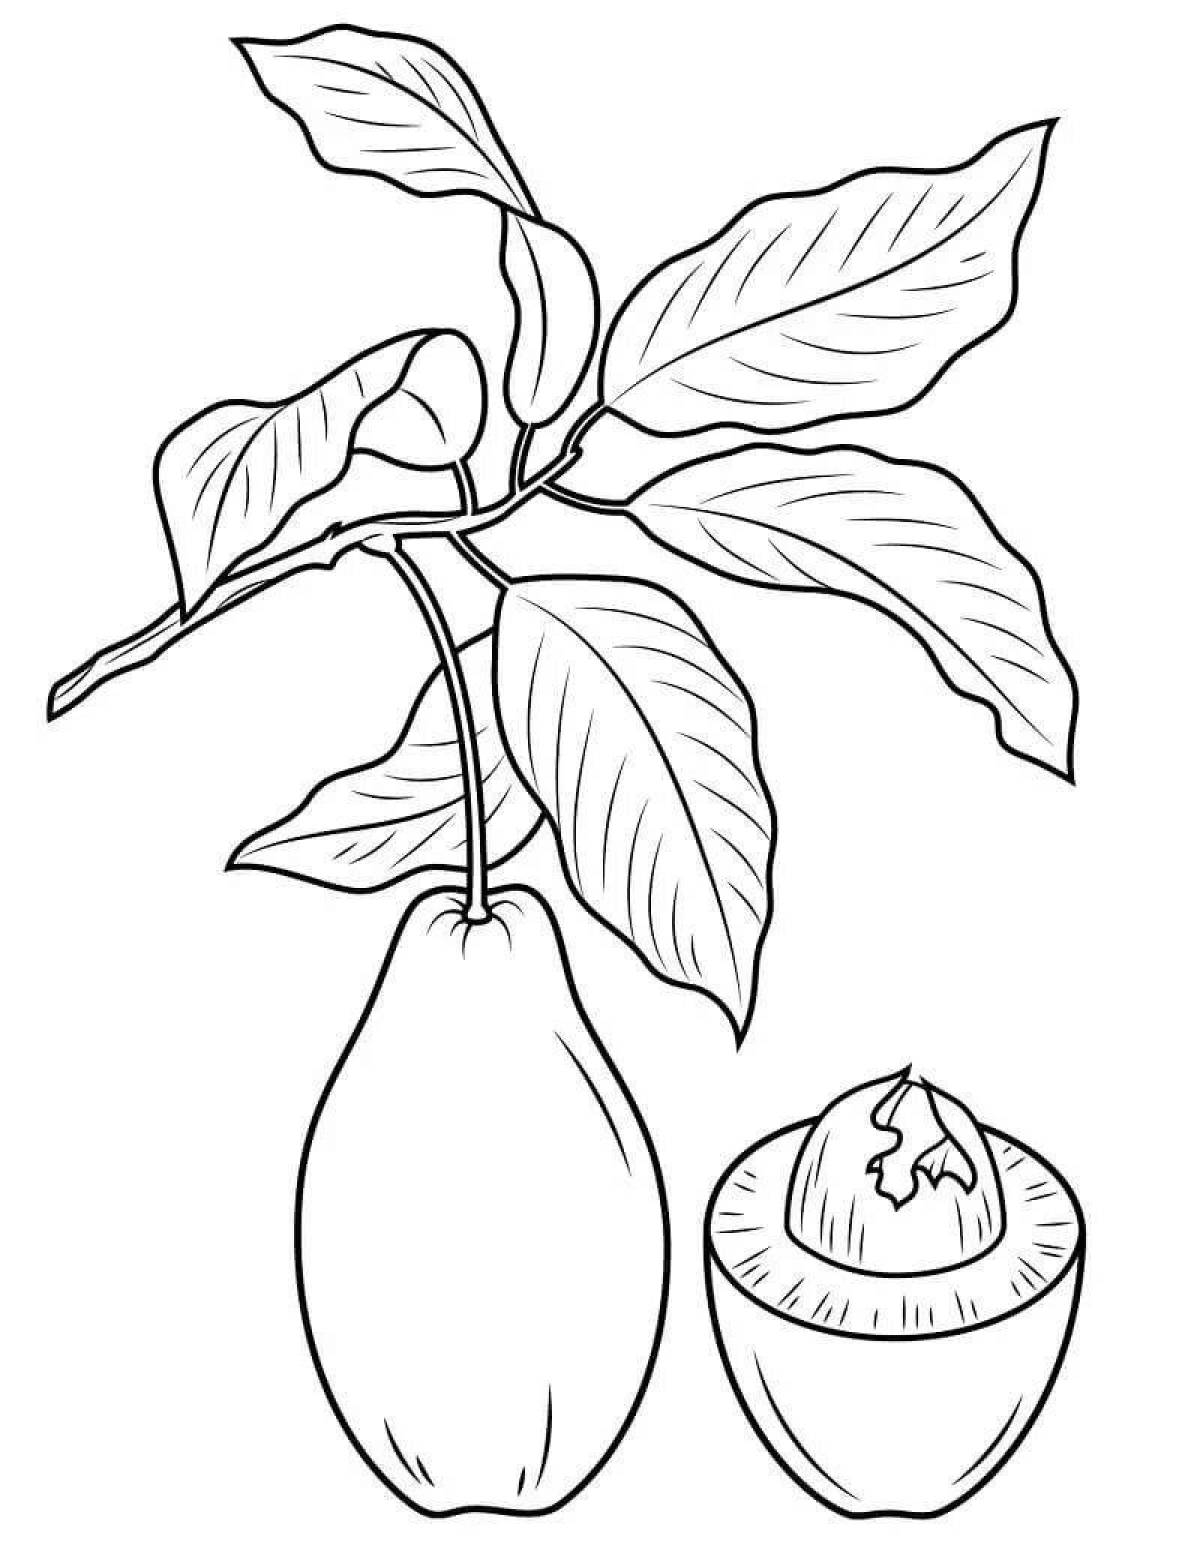 Fabulous avocado coloring page for girls